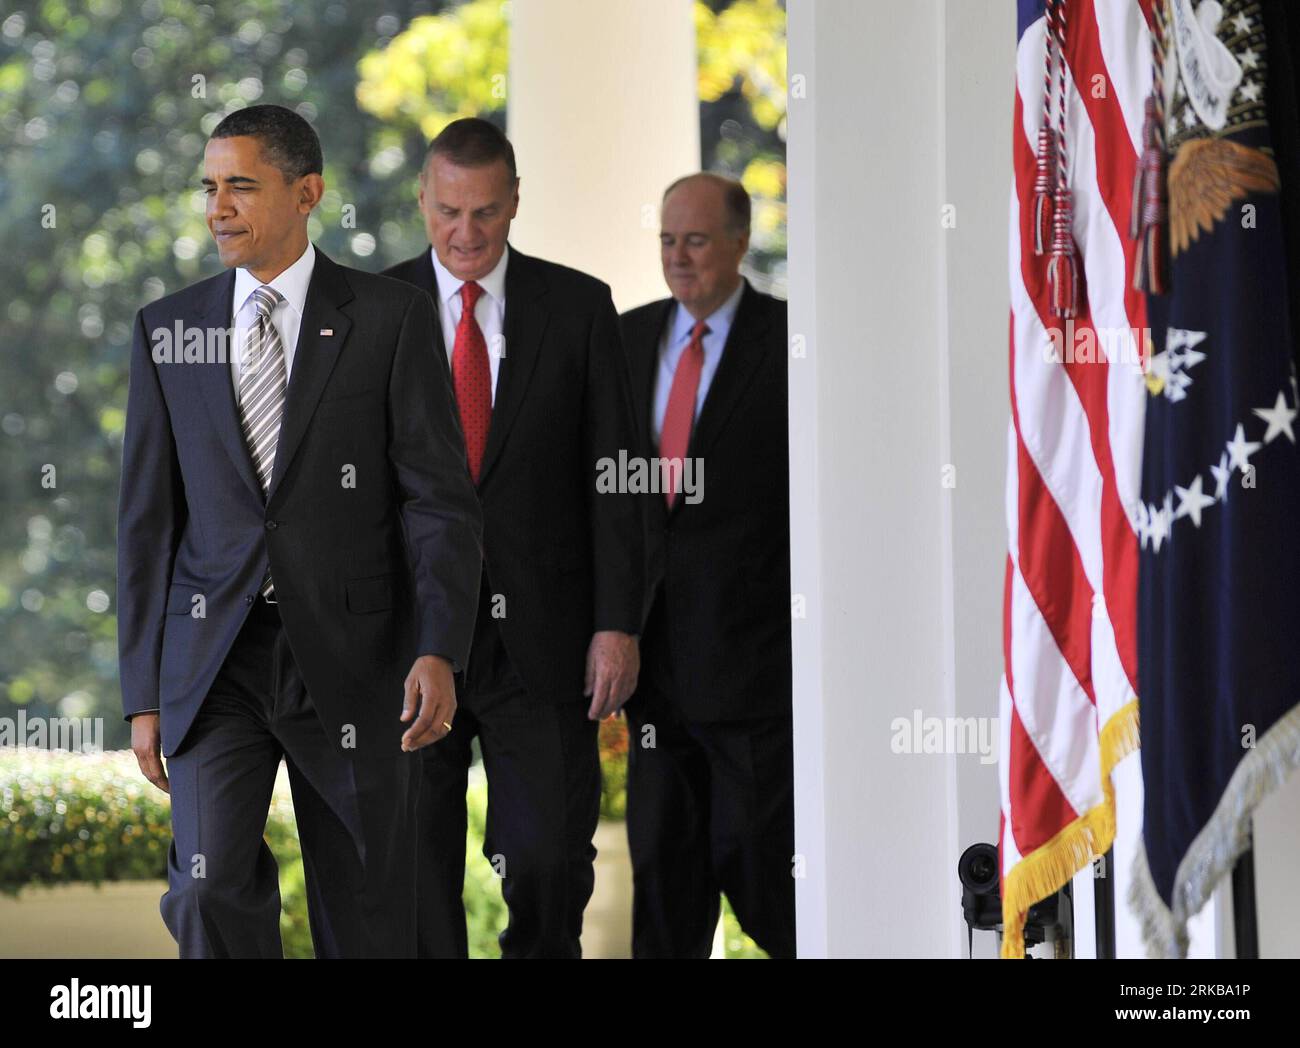 Bildnummer: 54521947  Datum: 08.10.2010  Copyright: imago/Xinhua (101008) -- WASHINGTON, Oct. 8, 2010 (Xinhua) -- U.S. President Barack Obama (L), outgoing National Security Adviser James Jones (C) and his successor Tom Donilon arrive at the Rose Garden of the White House in Washington D.C., the United States, Oct. 8, 2010. Obama said on Friday that his National Security Adviser James Jones will step down by the end of this month, and he will be replaced by his deputy Tom Donilon. (Xinhua/Zhang Jun) (zw) U.S.-WASHINGTON-SECURITY PUBLICATIONxNOTxINxCHN People Politik premiumd kbdig xkg 2010 que Stock Photo